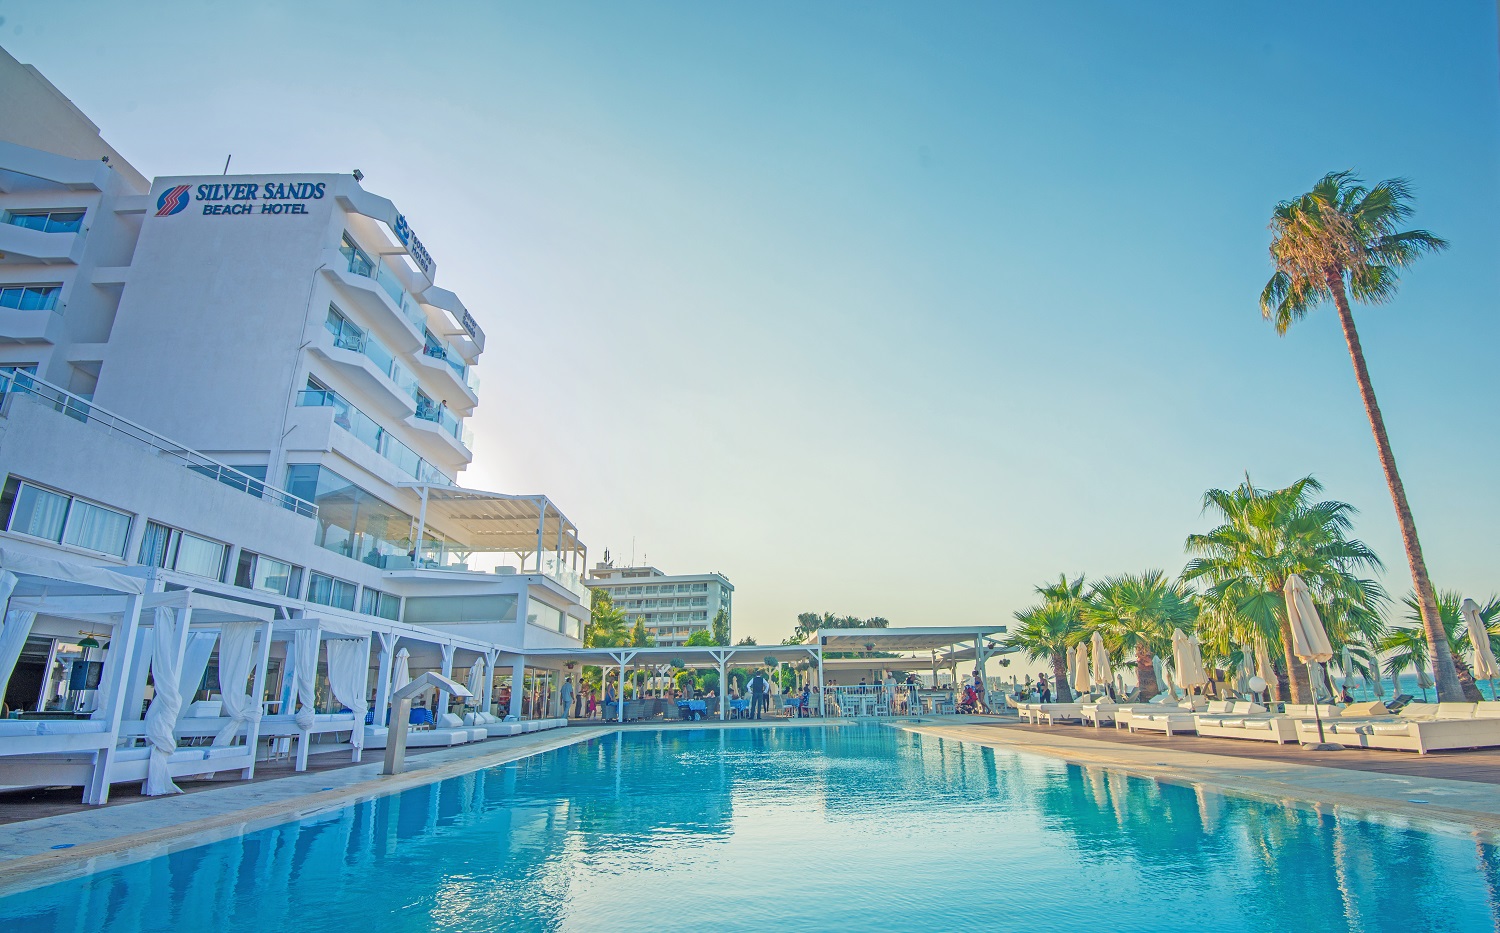 Silver Sands Beach Hotel image